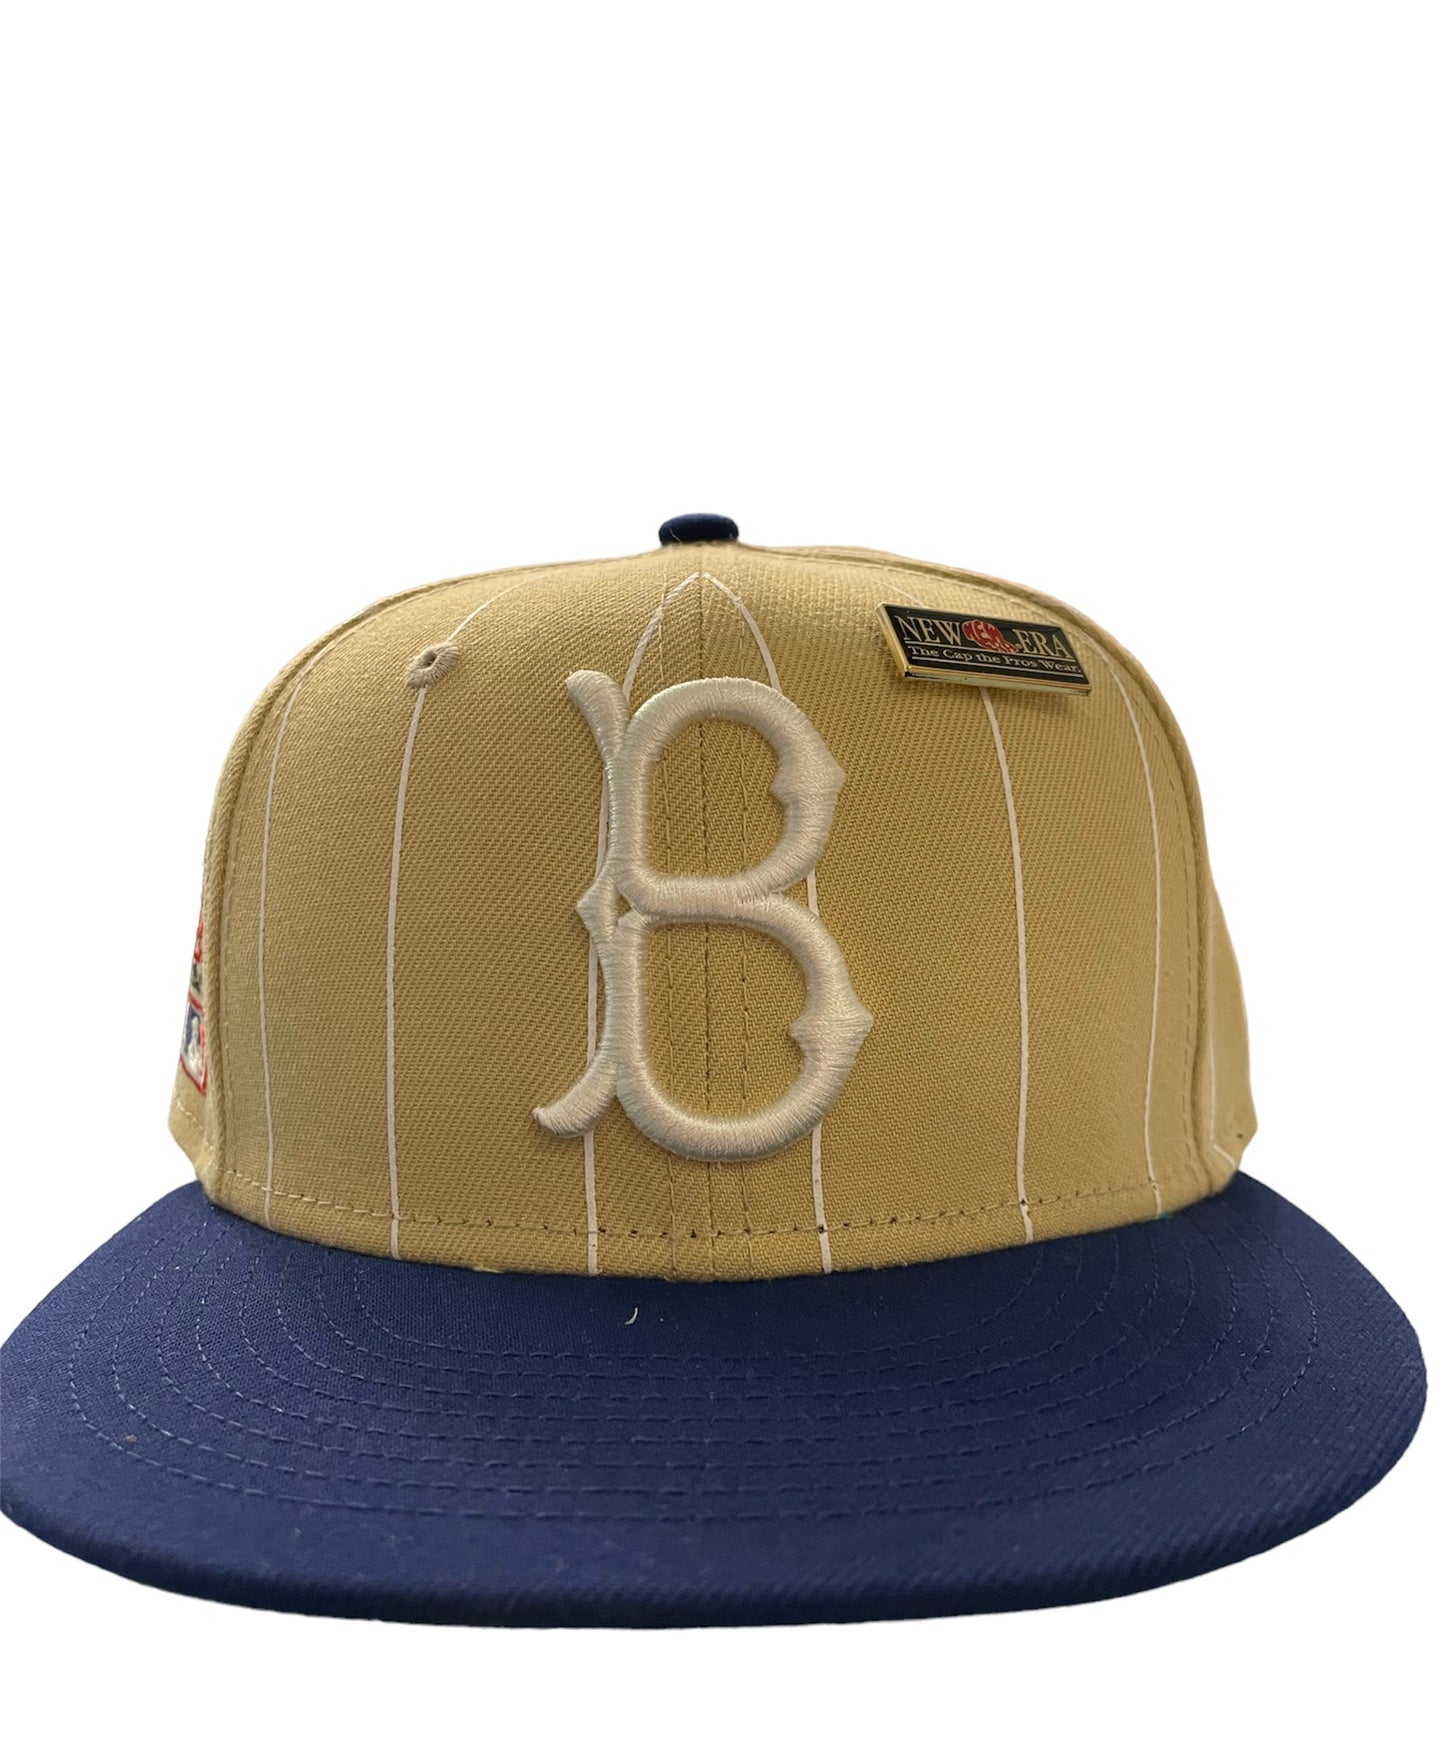 New Era Brooklyn Dodgers Fitted "The Cap The Pros Wear"